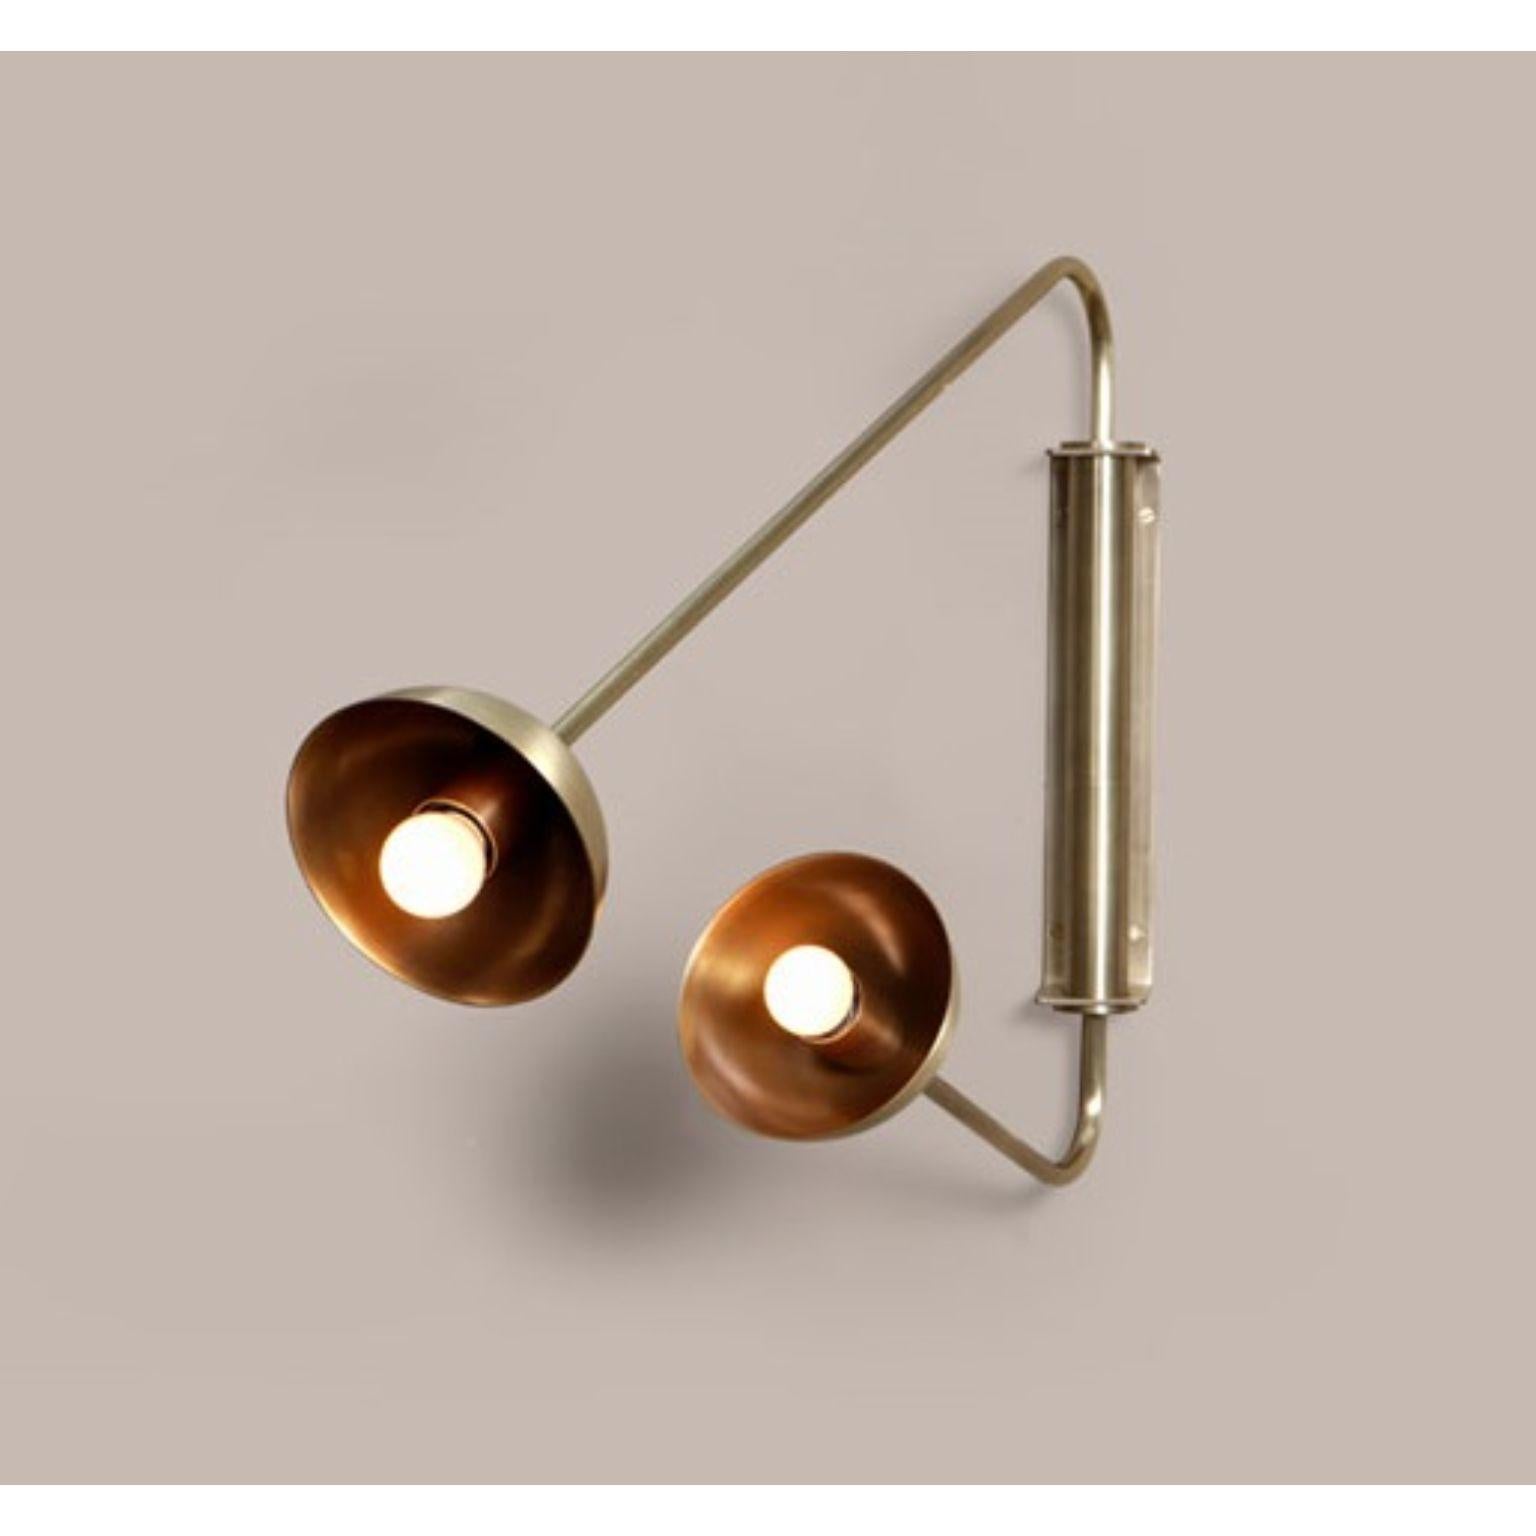 Float Two Arm Brass Dome Wall Sconce by Lamp Shaper
Dimensions: D 117 x W 74 x H 109.5 cm.
Materials: Brass.

Different finishes available: raw brass, aged brass, burnt brass and brushed brass Please contact us.

All our lamps can be wired according